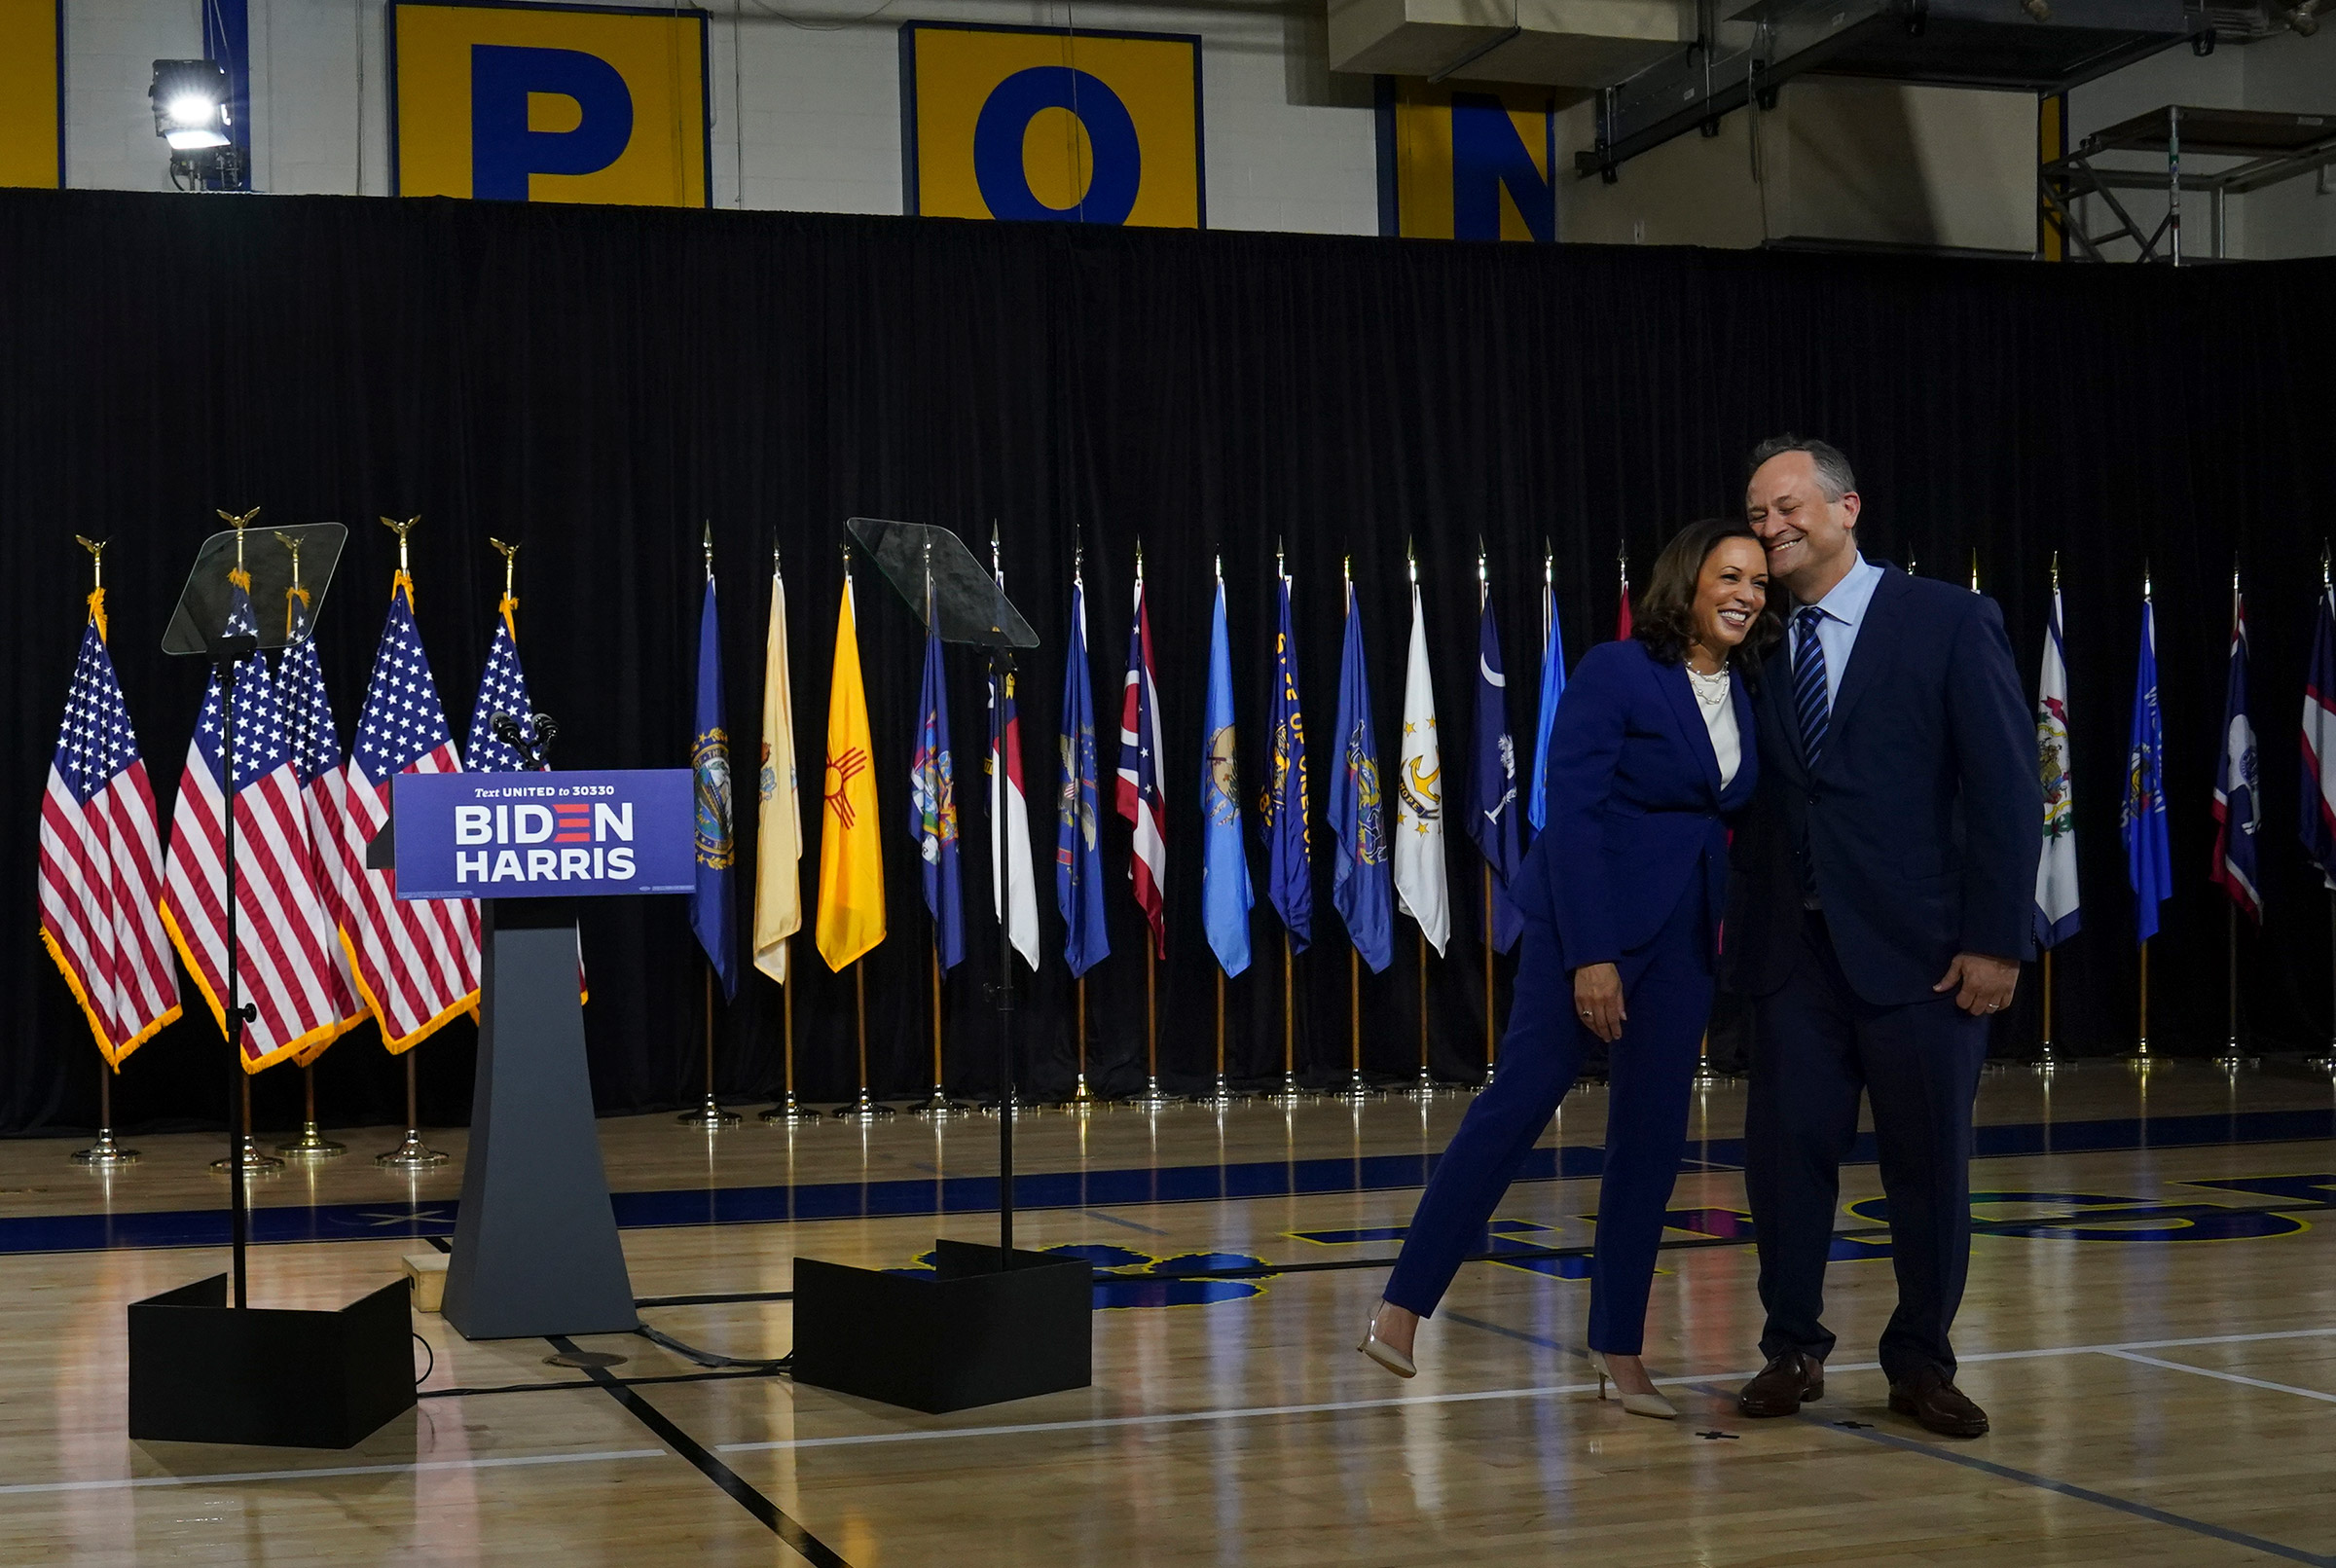 Sen. Kamala D. Harris leans on her husband Doug Emhoff after being introduced by presumptive Democratic presidential nominee Joe Biden as his running mate during an event in Wilmington, Del., on Aug. 12, 2020. (Toni L. Sandys—The Washington Post/Getty Images)